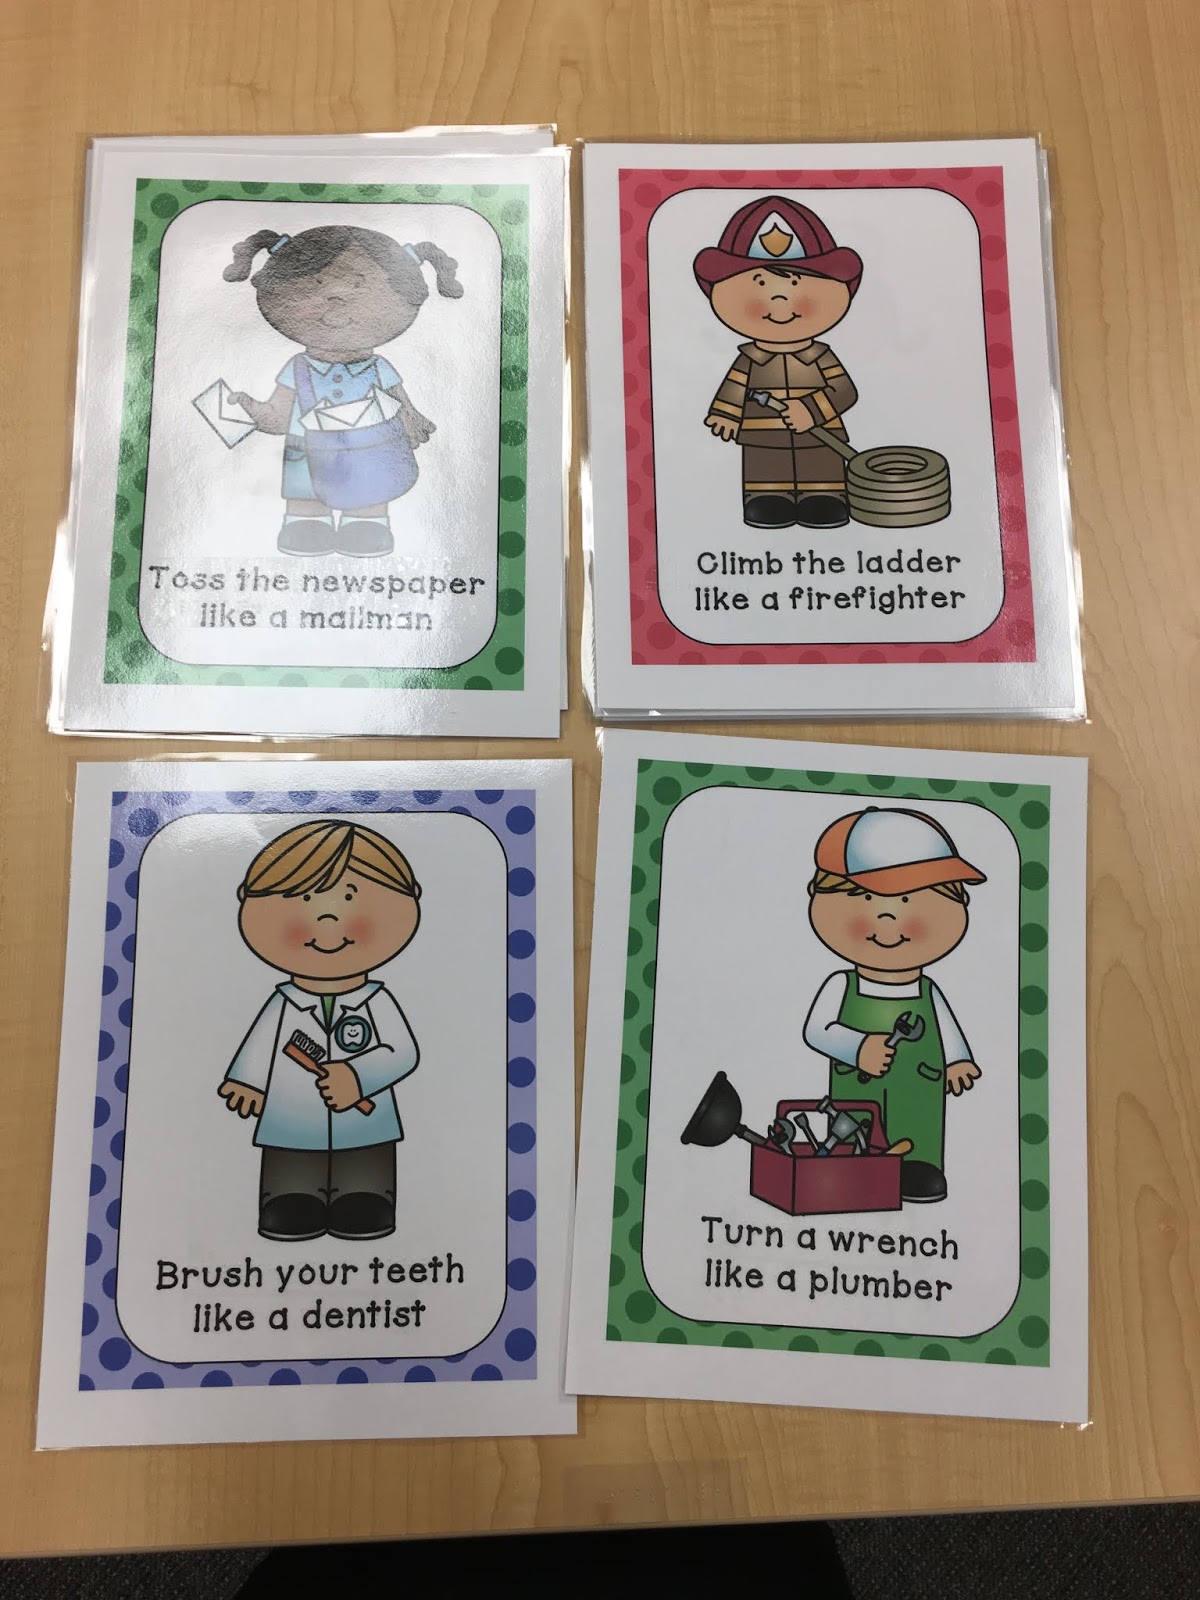 Four of the movement community partners cards. For example: brush your teeth like a dentist